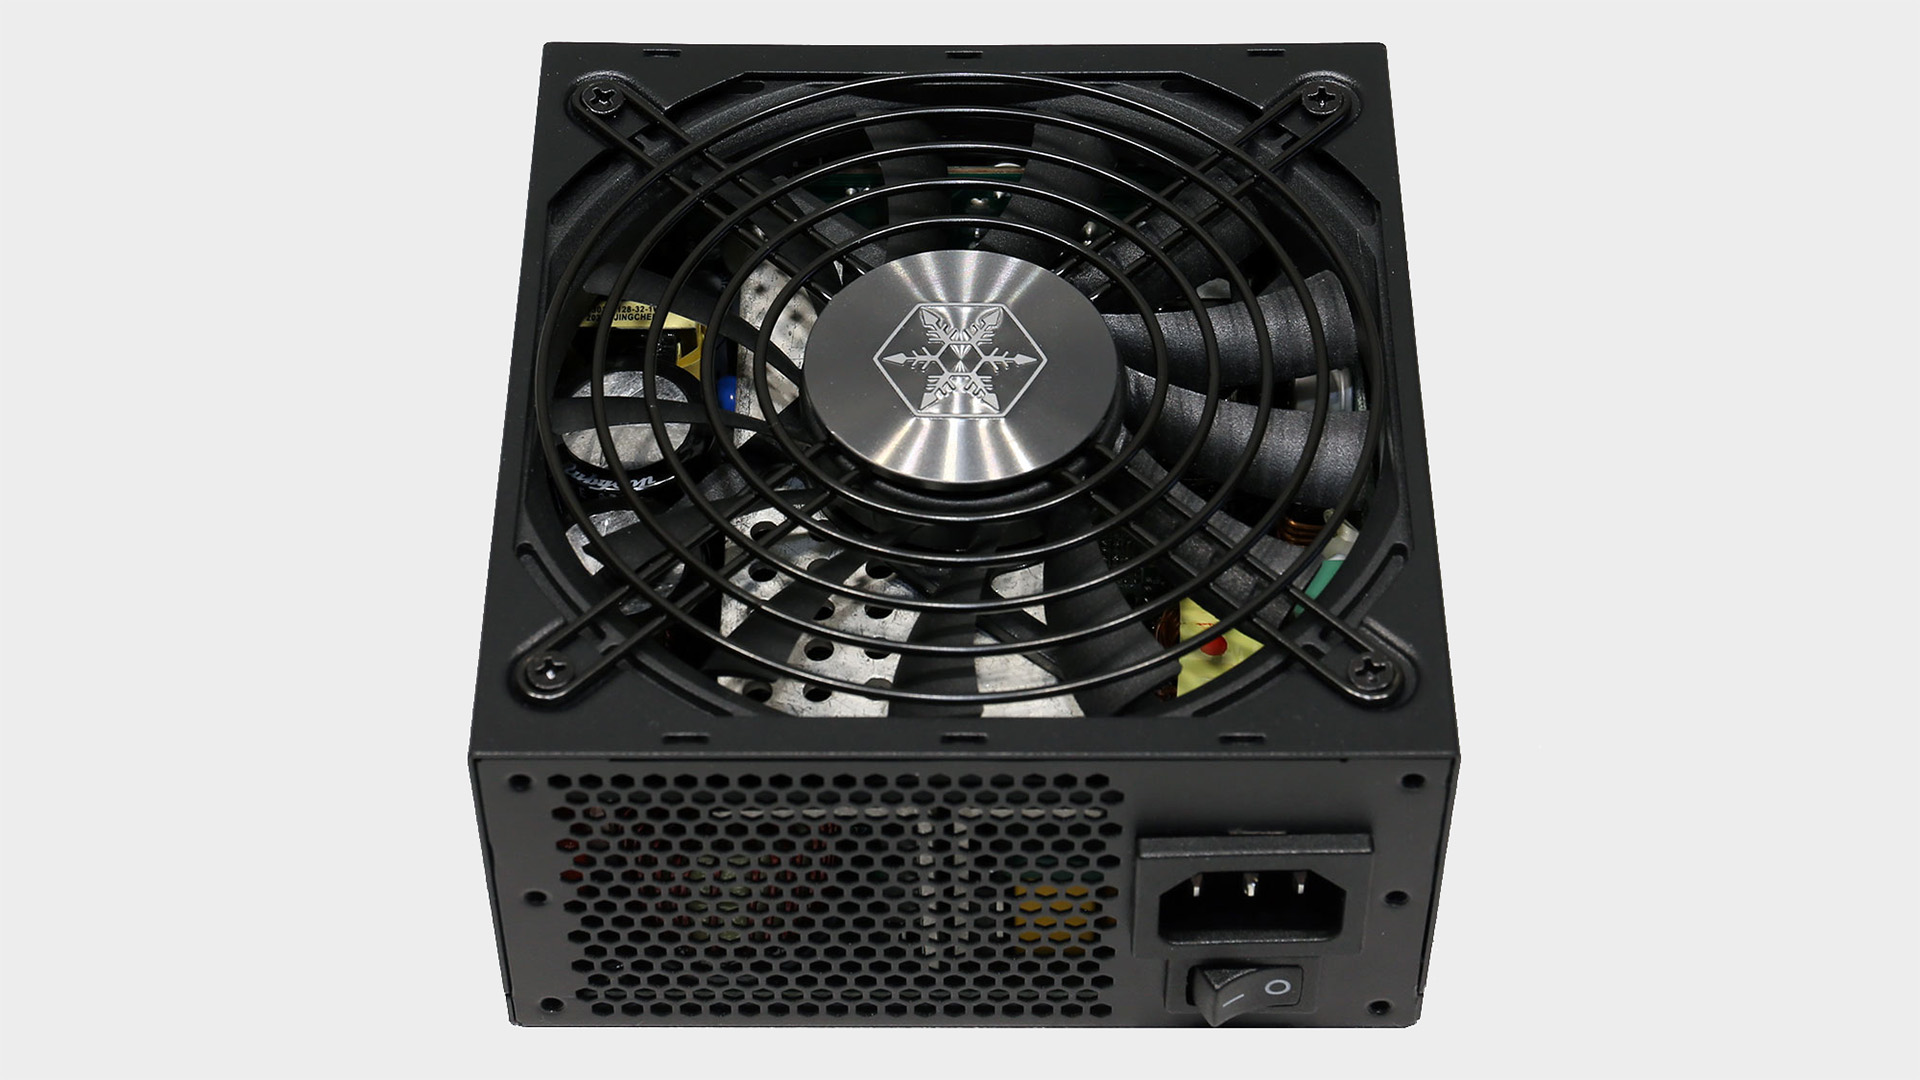 Silverstone SX1000 PSU from various angles.